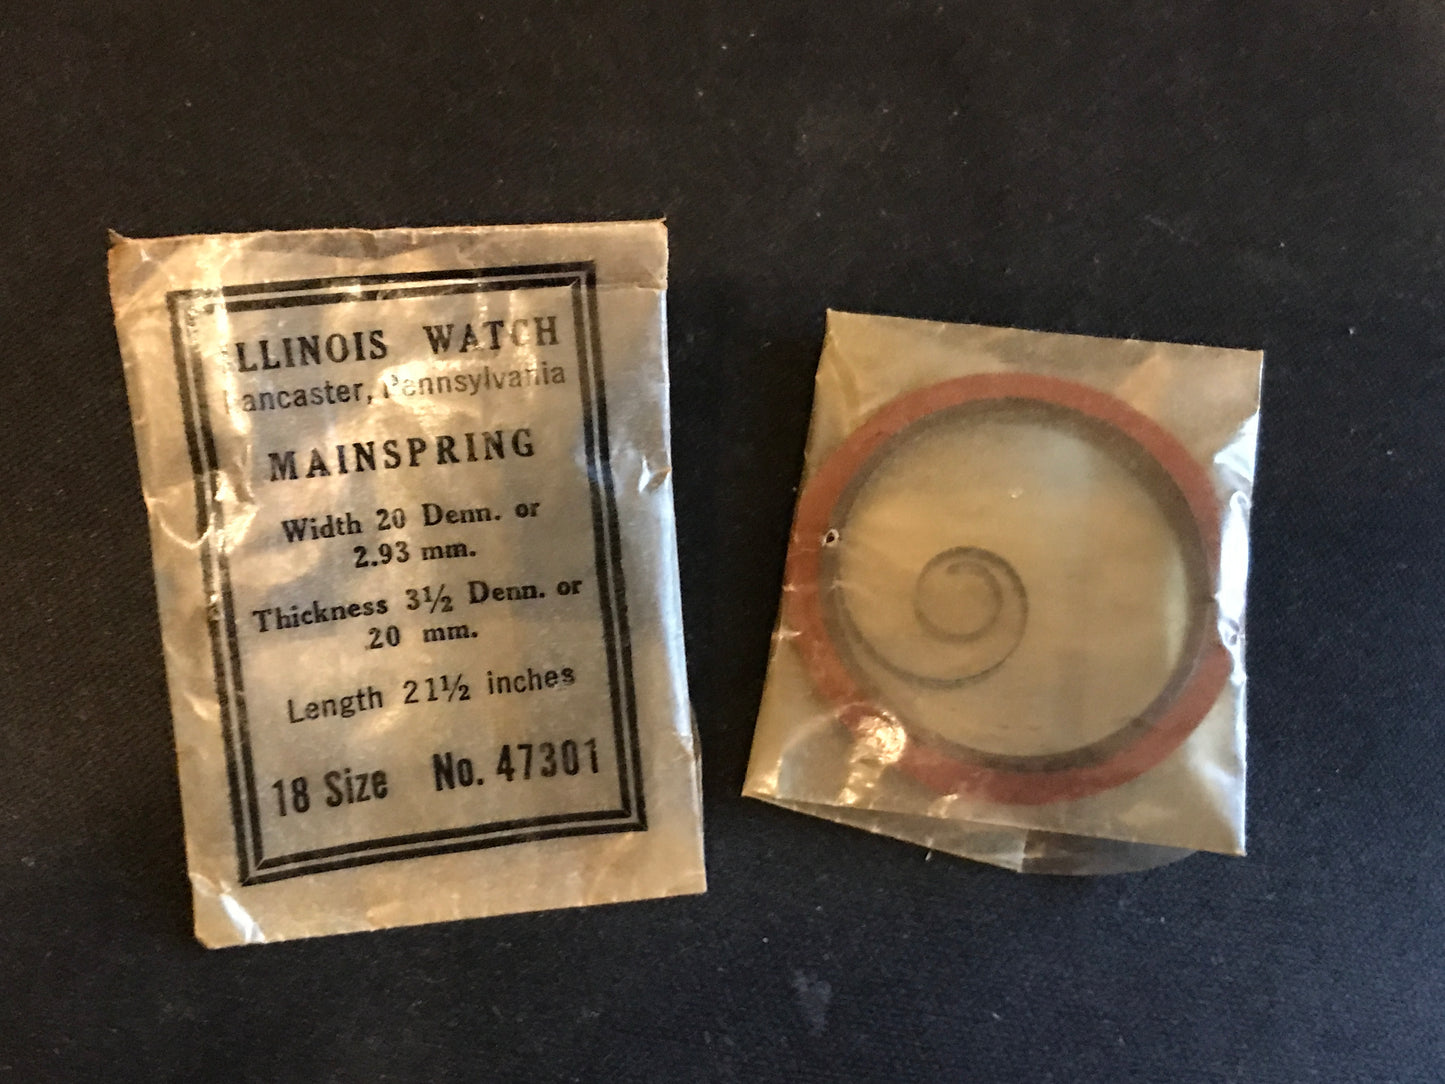 Illinois Factory Mainspring #47301 for 18s Pocket Watches - Steel